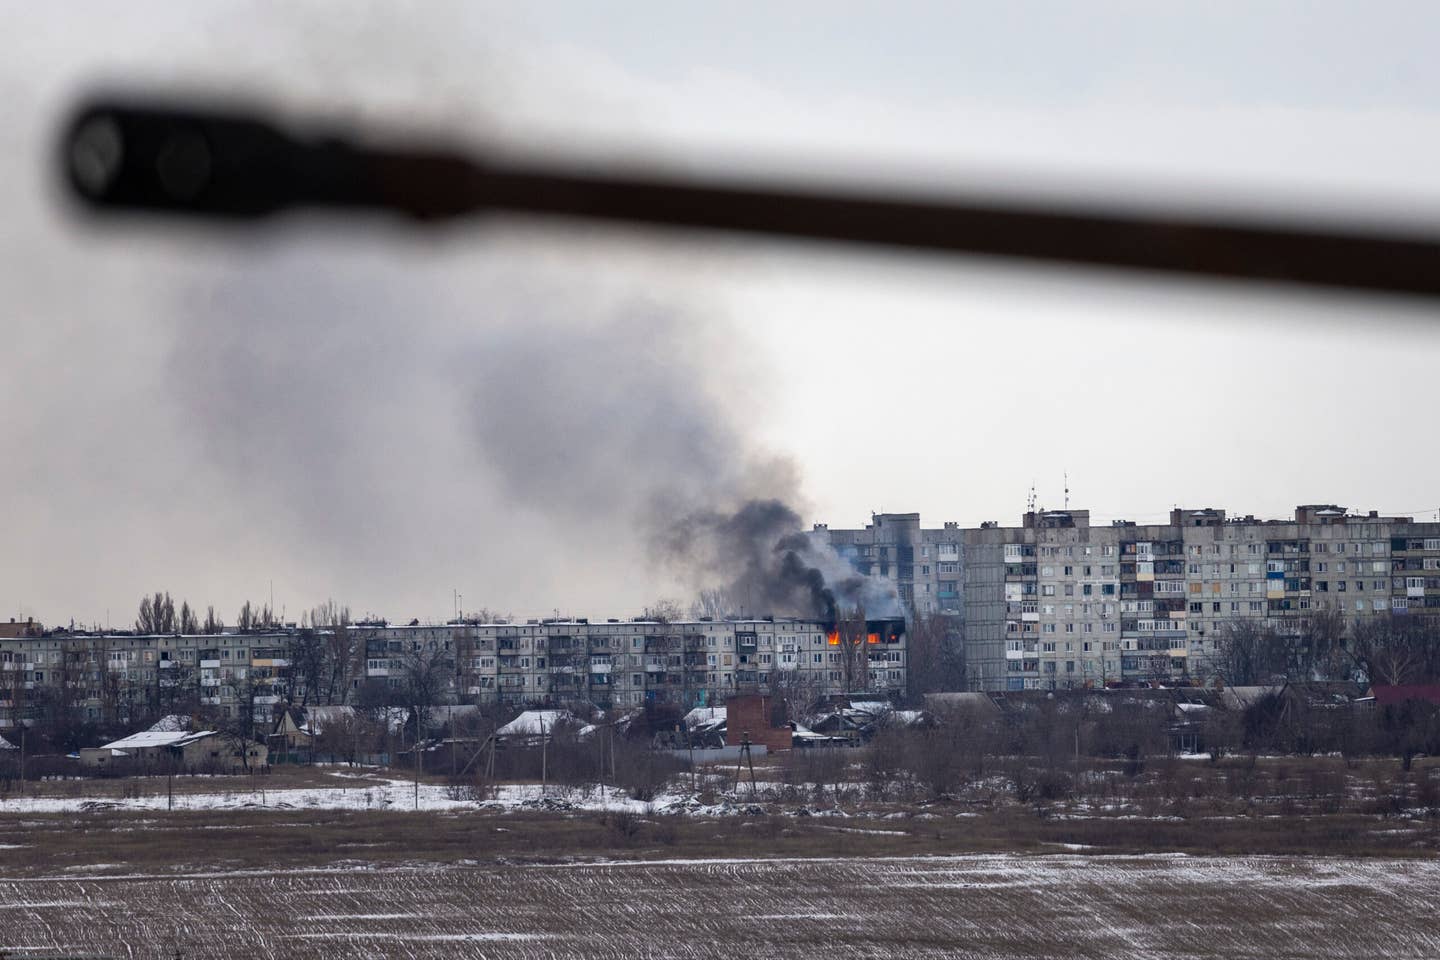 A Ukrainian military vehicle drives by as an apartment building hit by Russian artillery burns in the distance on Feb. 14, 2023 in Bakhmut. (Photo by John Moore/Getty Images)